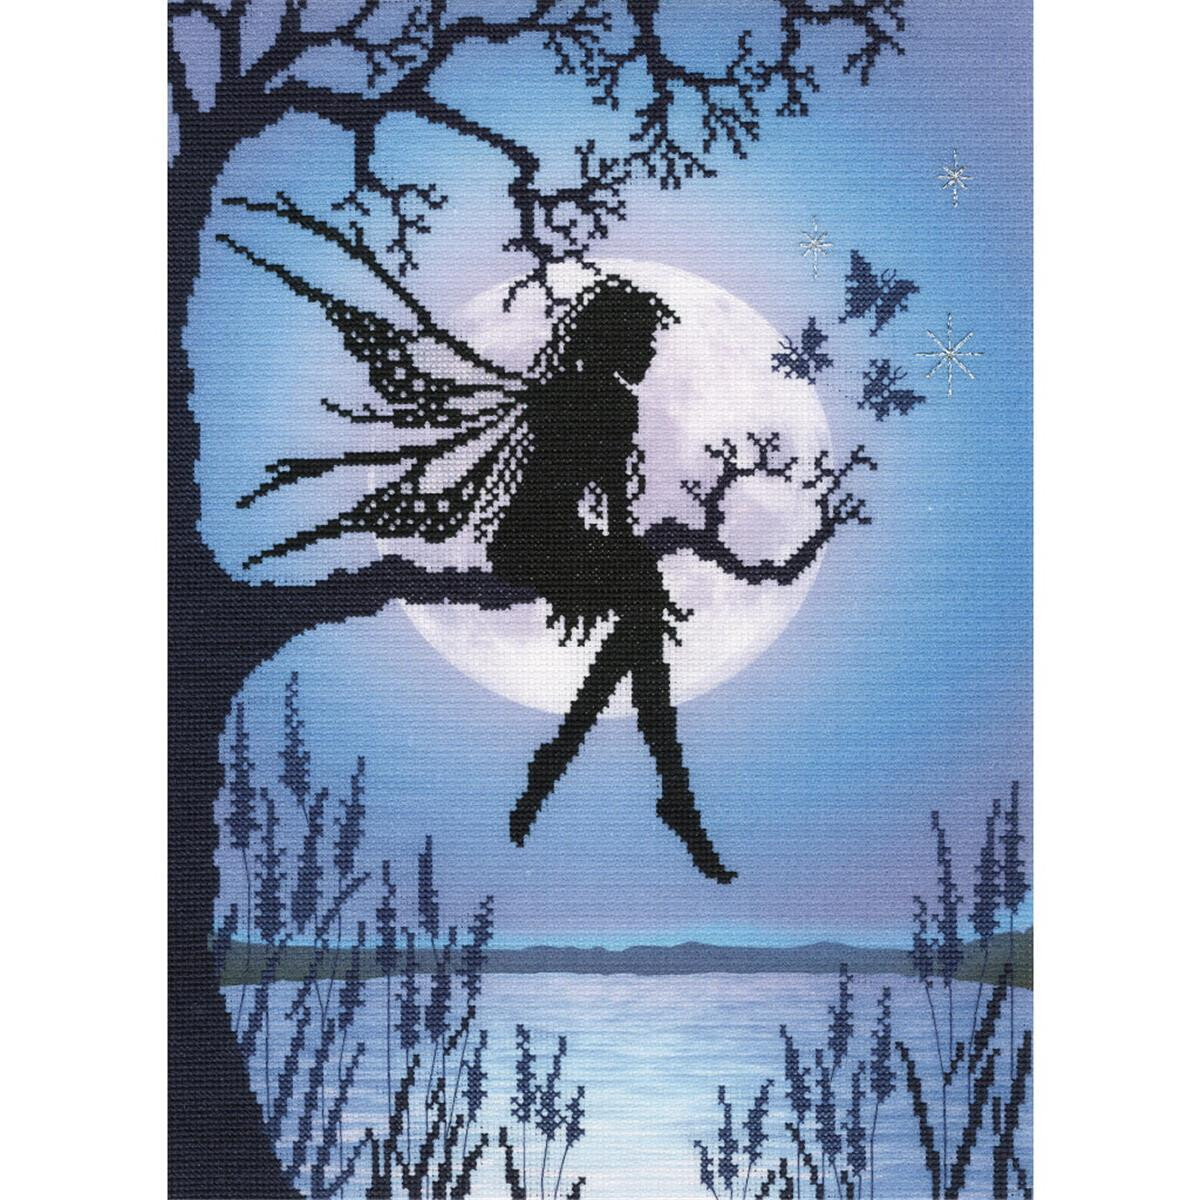 A fairy with wings sits as a silhouette on a branch in...